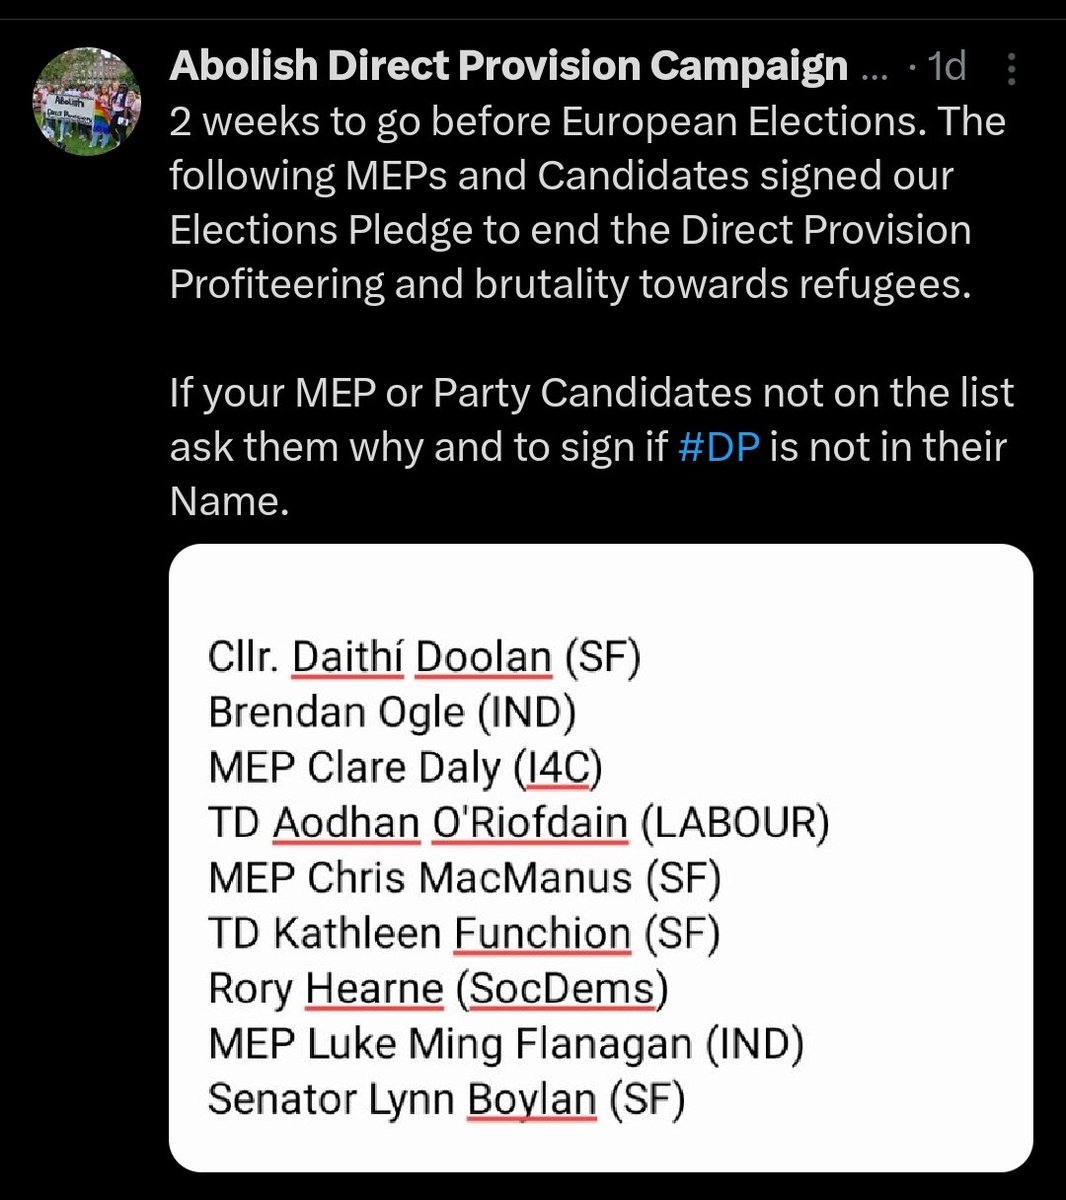 🇮🇪🚨 A great list of Sinn Féin MEP candidates not to vote for 👇 This is an NGO group set-up by former African 'asylum-seekers' to promote open-borders using the Irish asylum system & Sinn Féin have signed up to help them achieve this #IrelandisFull @sinnfeinireland